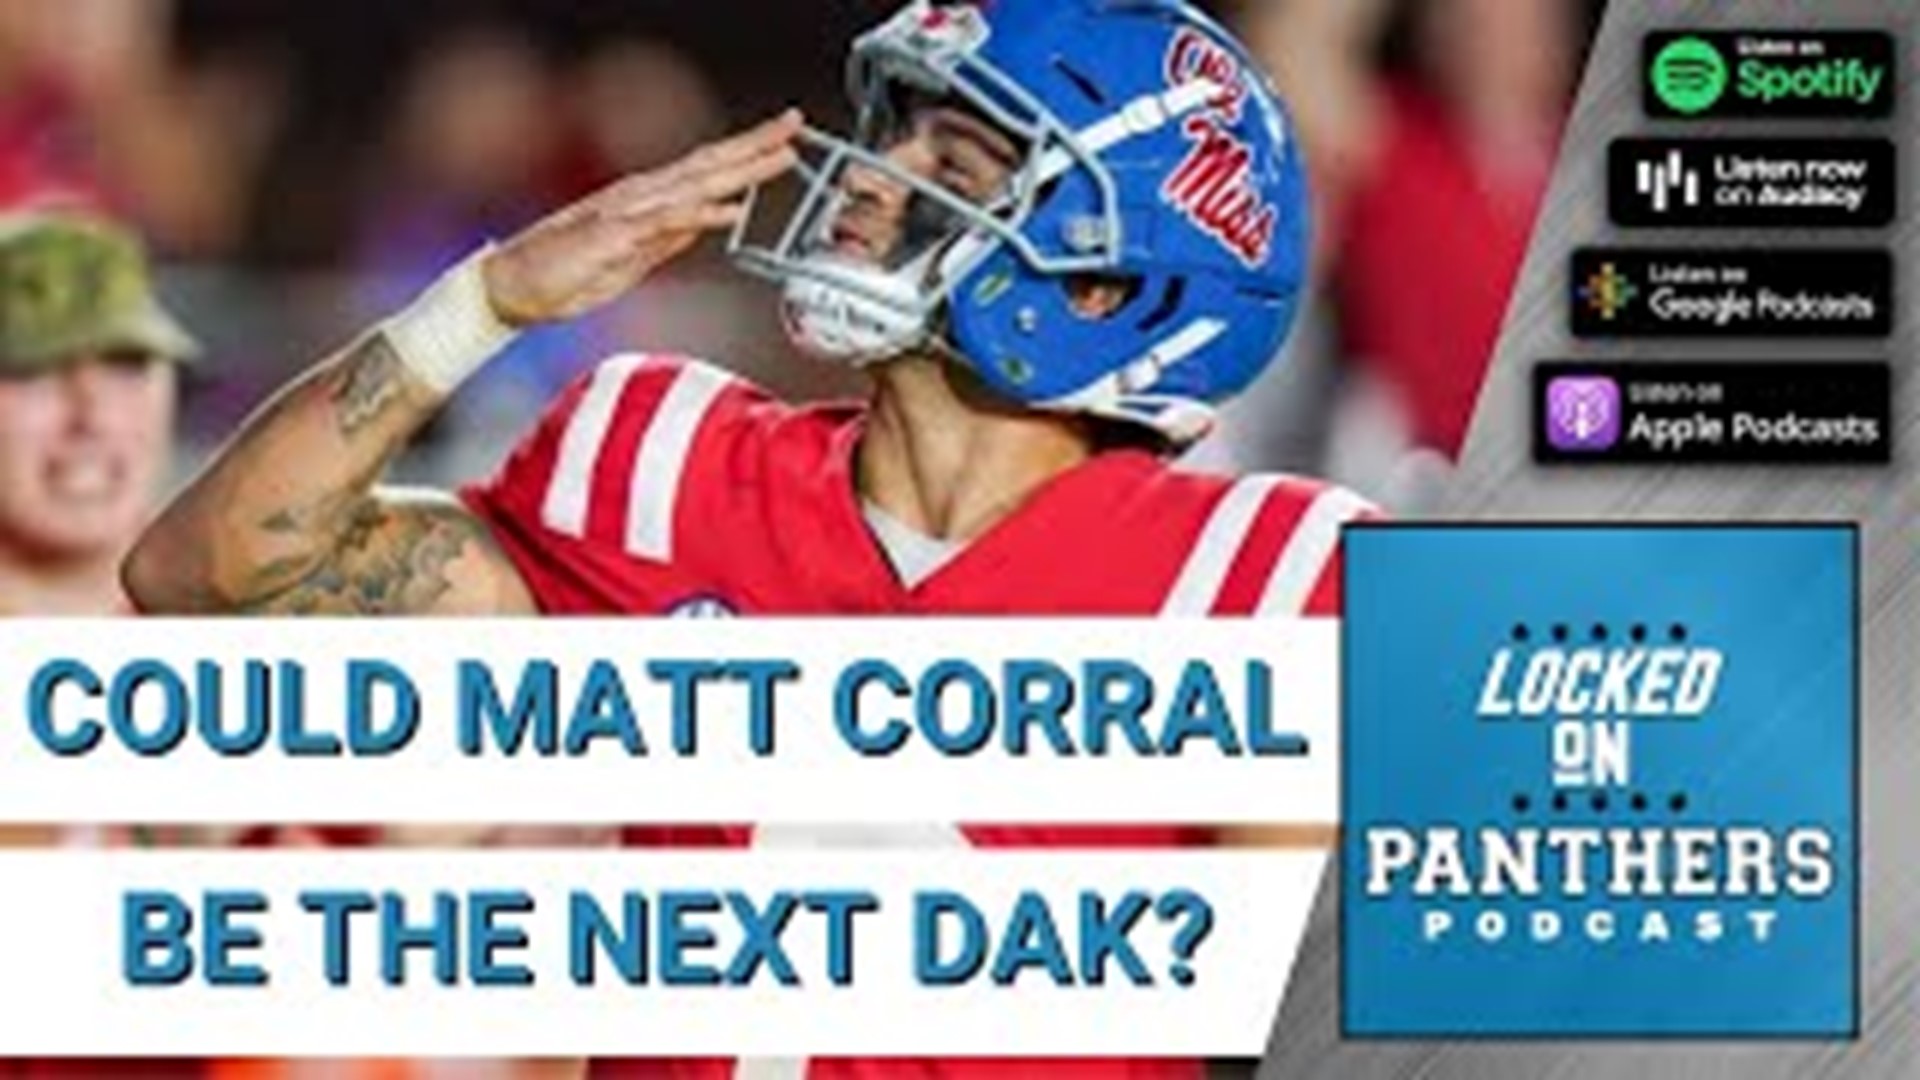 Julian Council is back with this week's mailbag! Does Matt Corral have the potential to be as good as Dak Prescott?